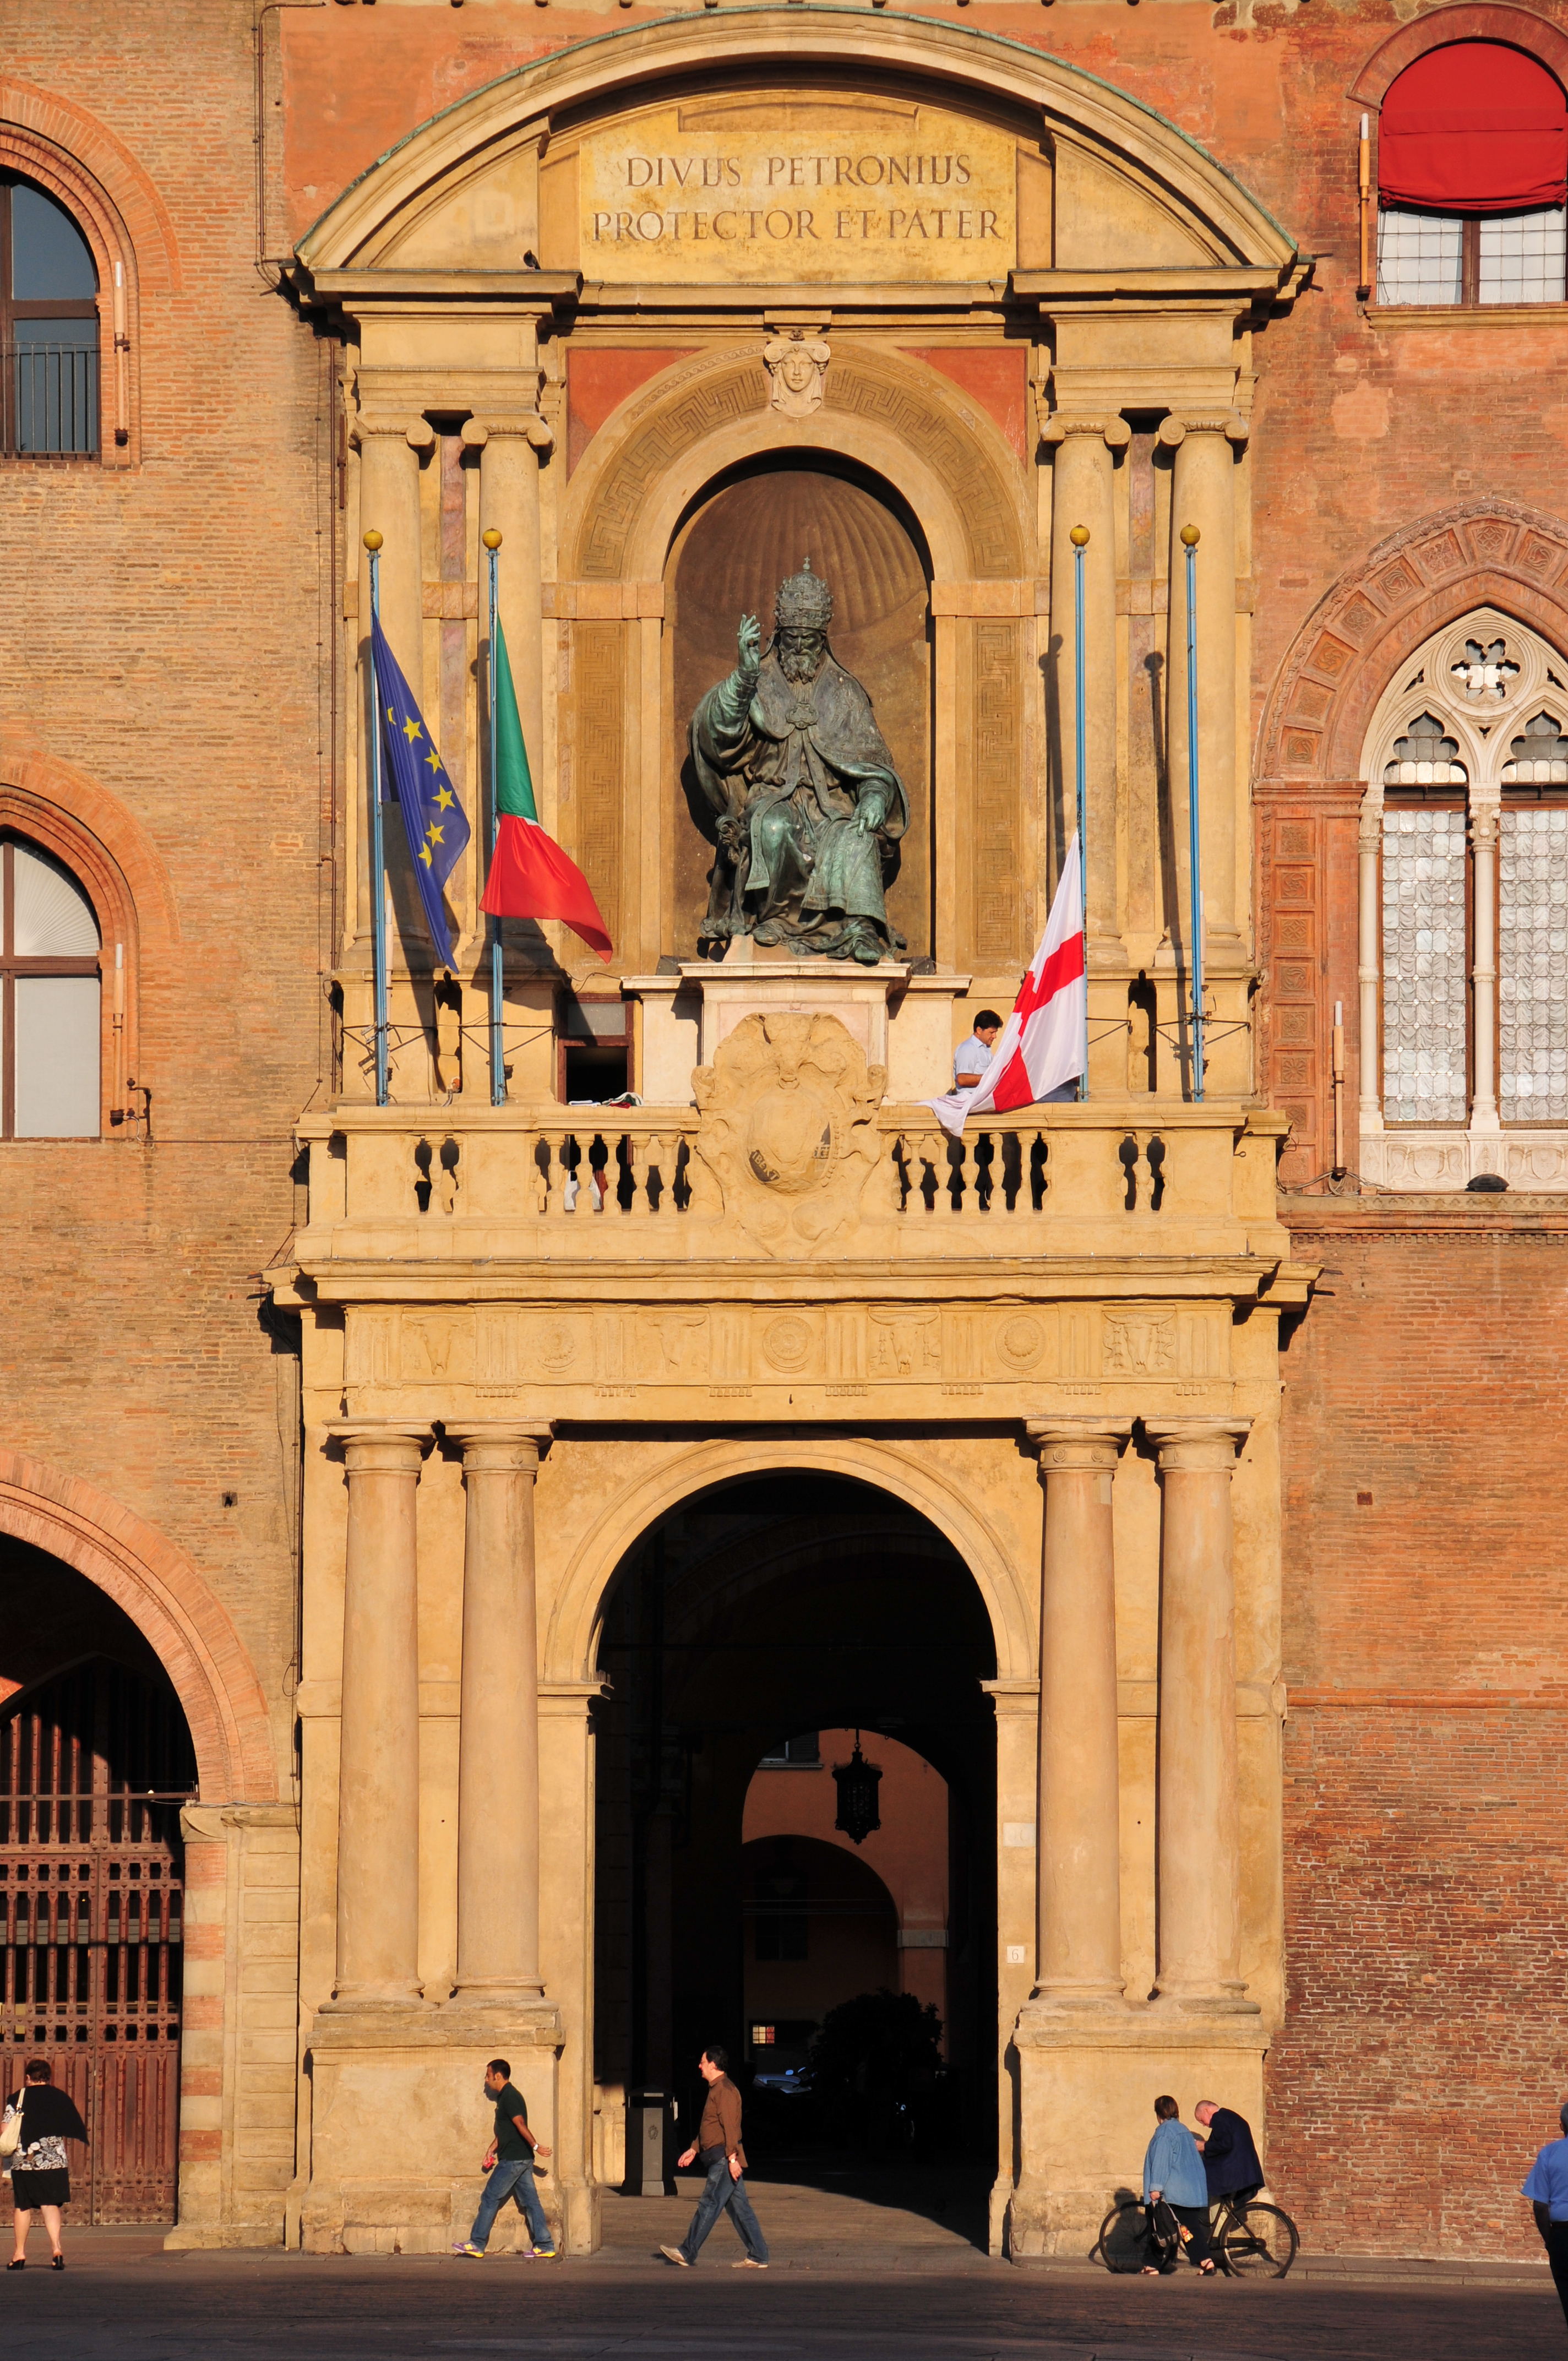 The Best of Bologna - Paus